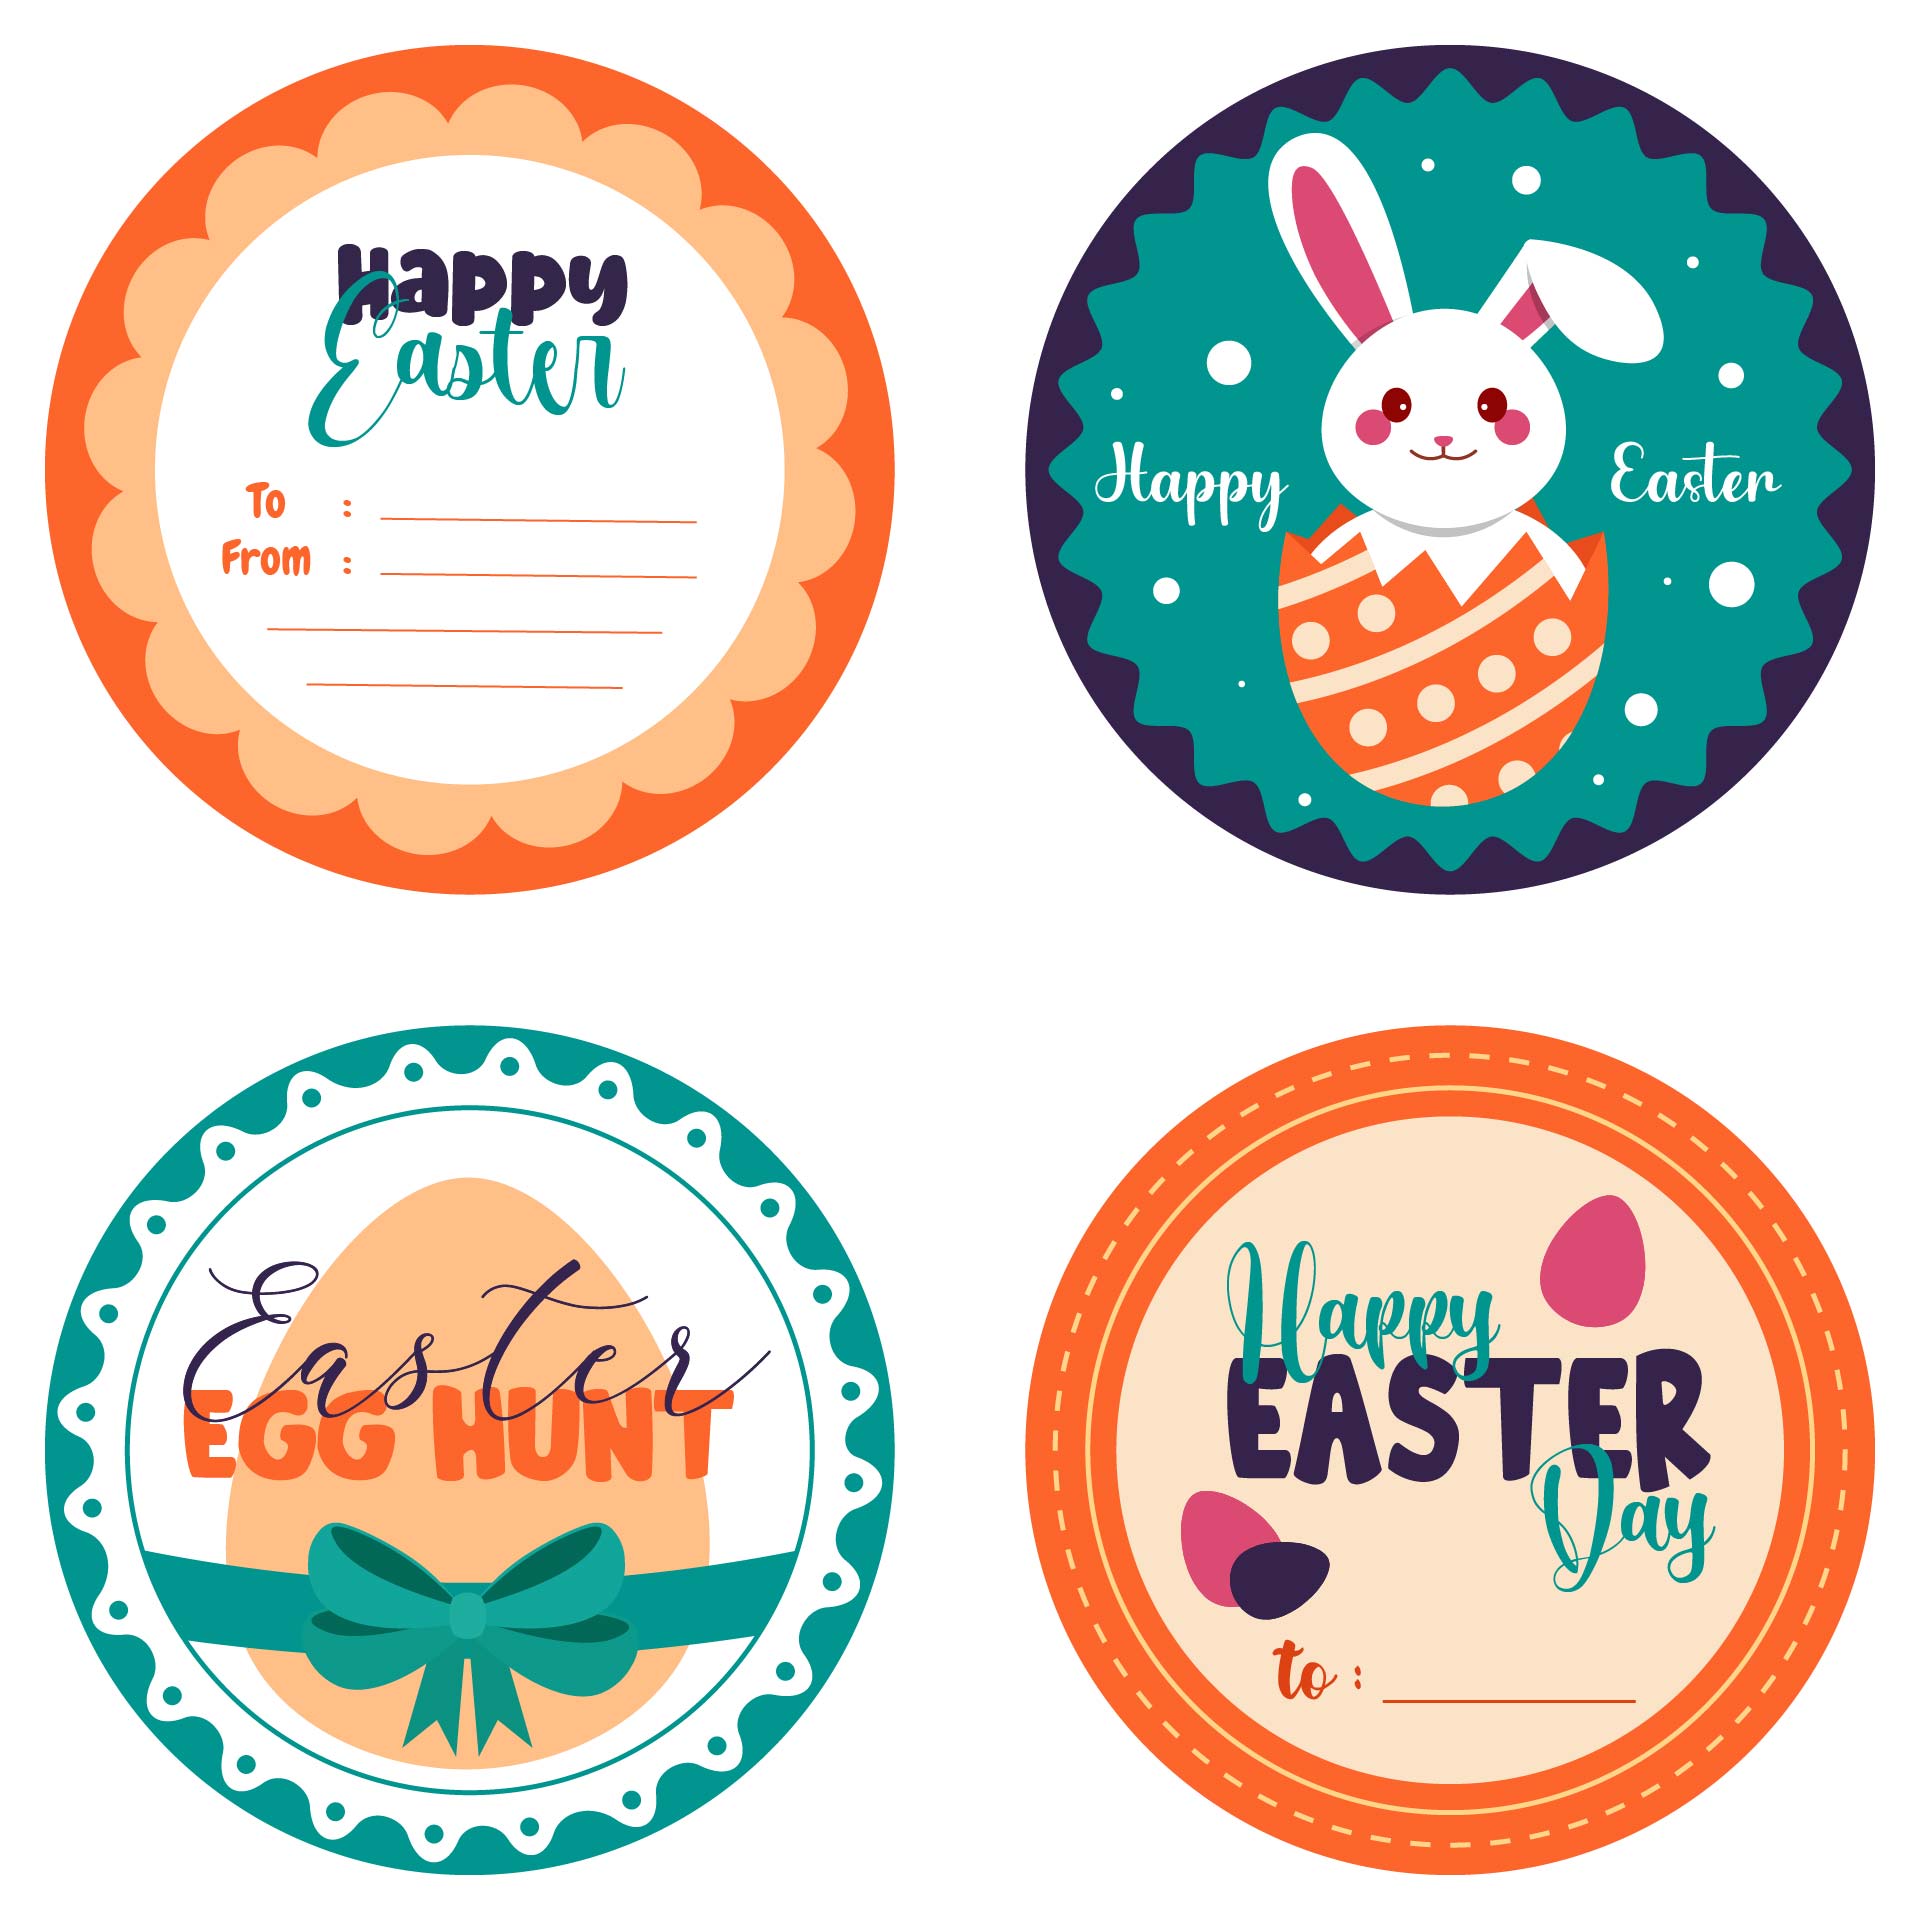 4-best-images-of-happy-easter-gift-tags-free-printables-free